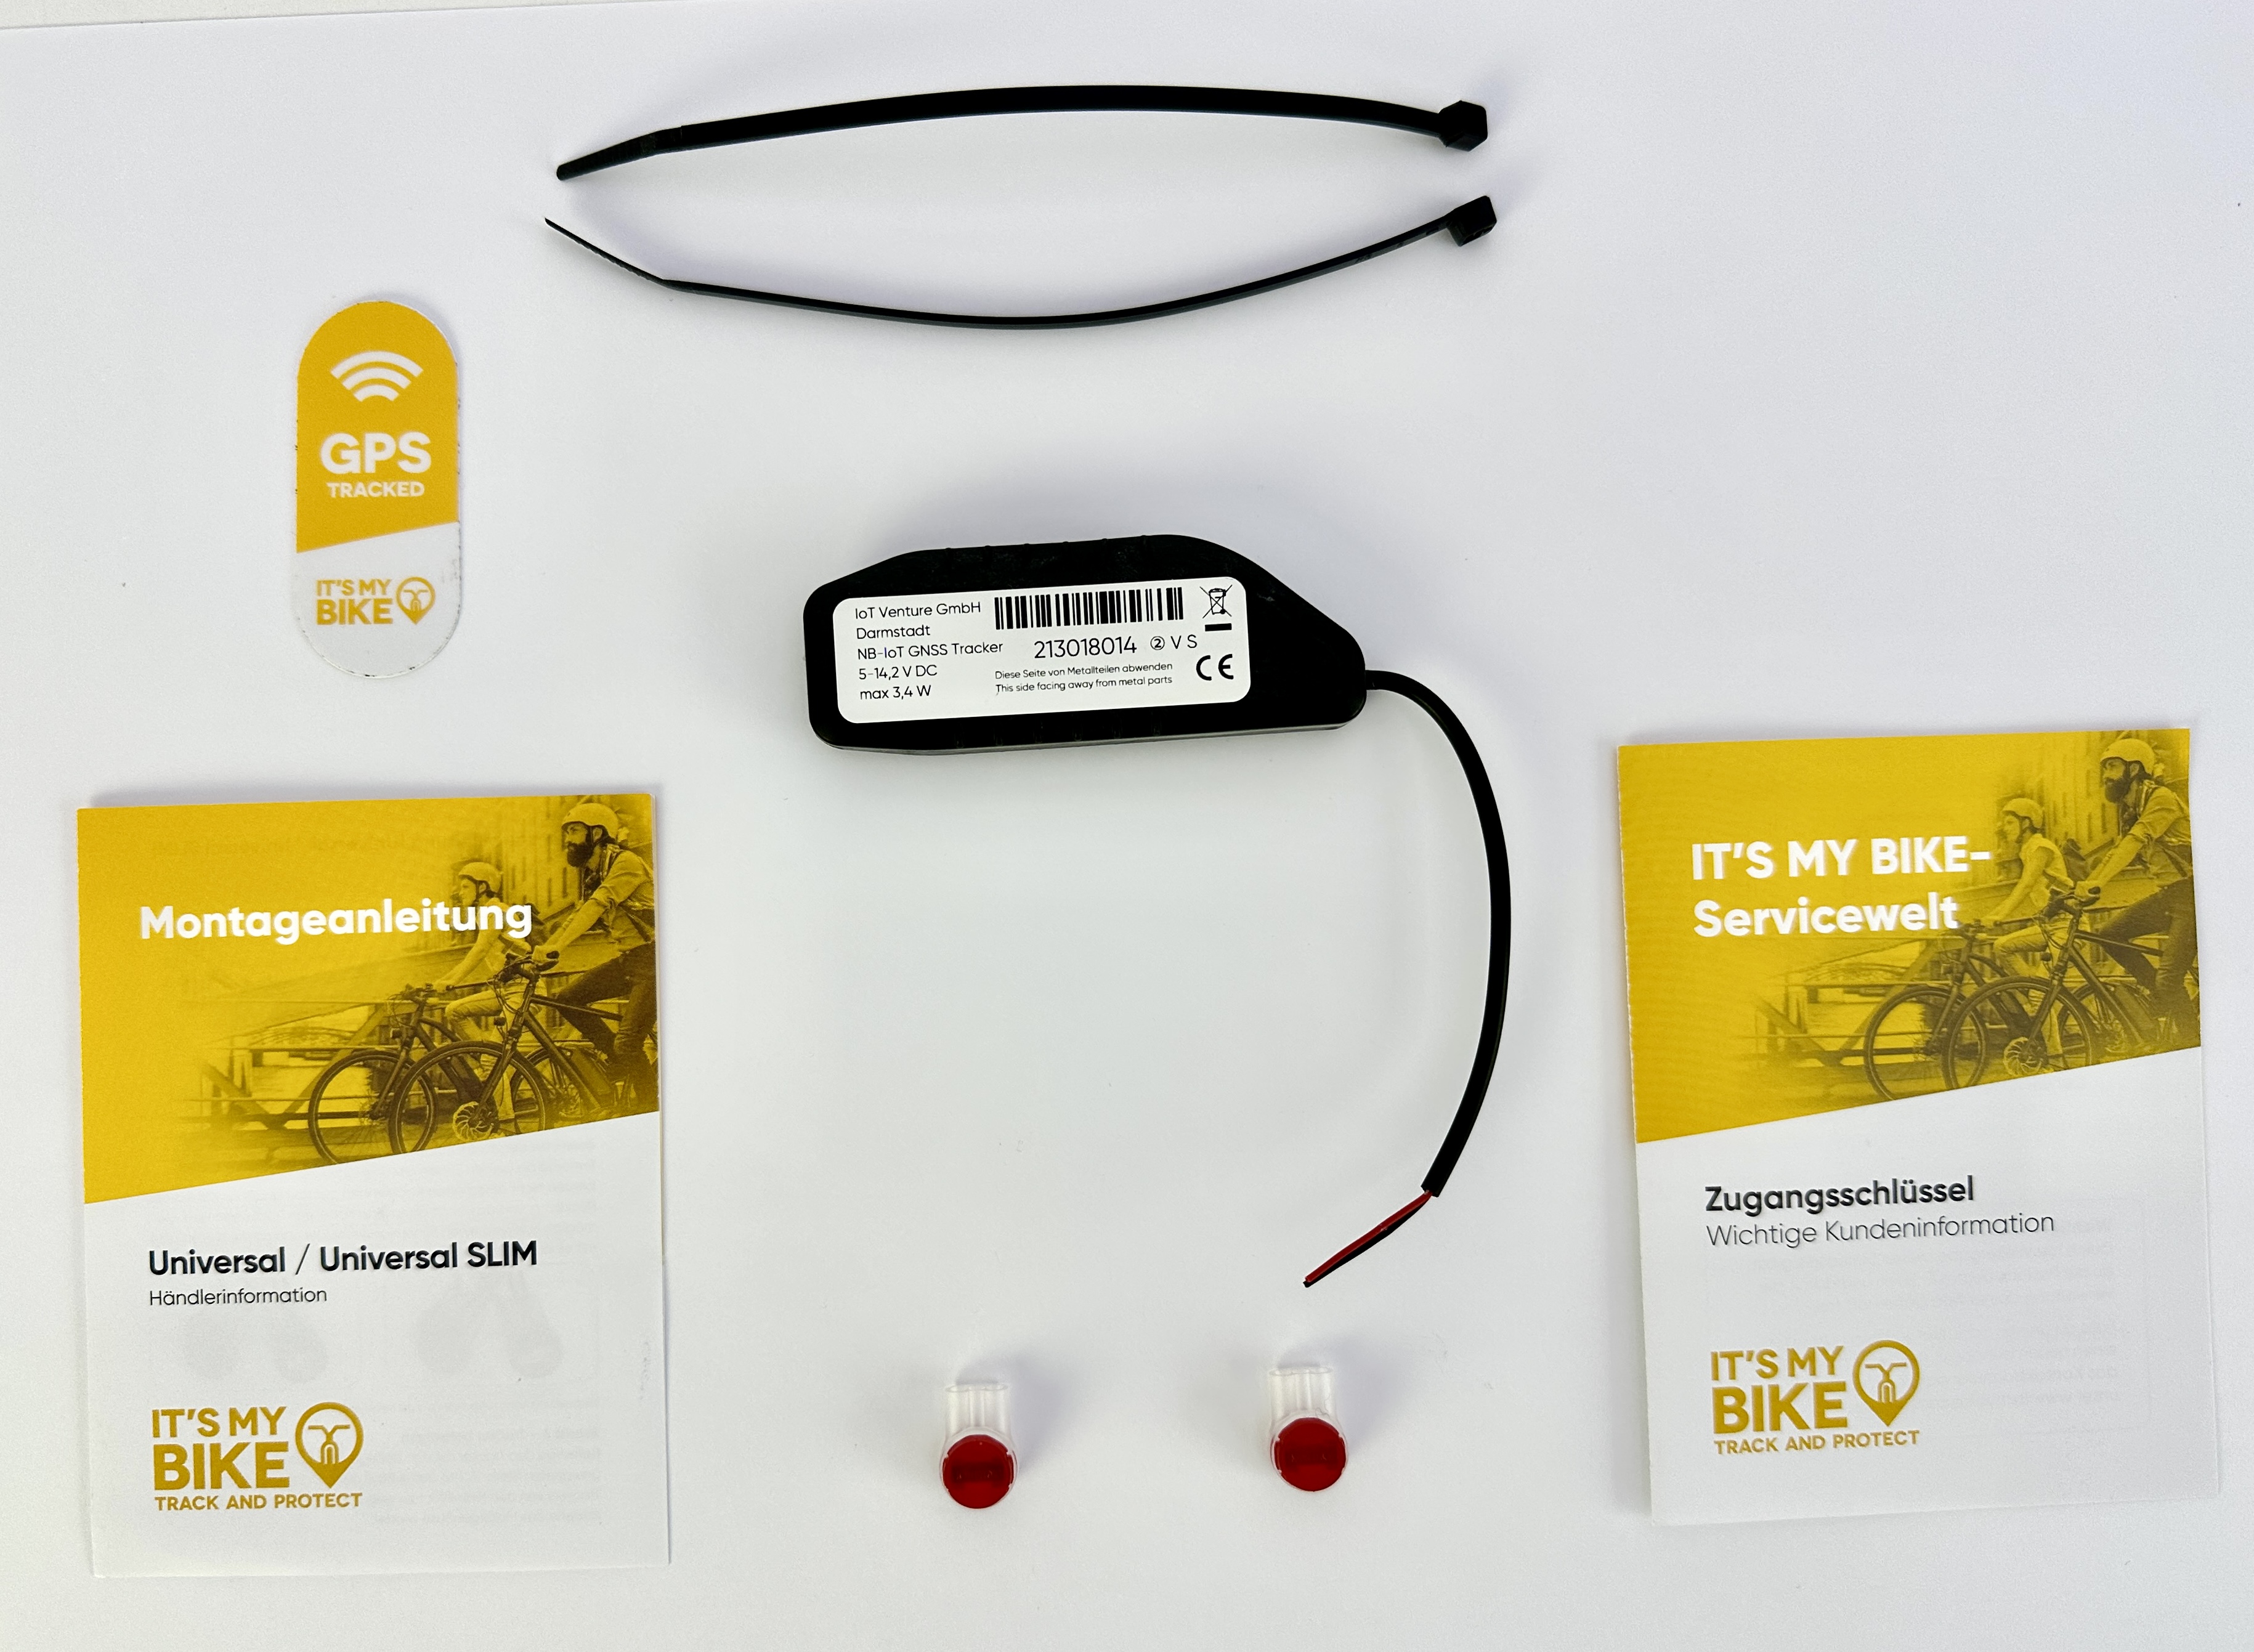 GPS Tracker for E-Bikes from IT'S MY BIKE